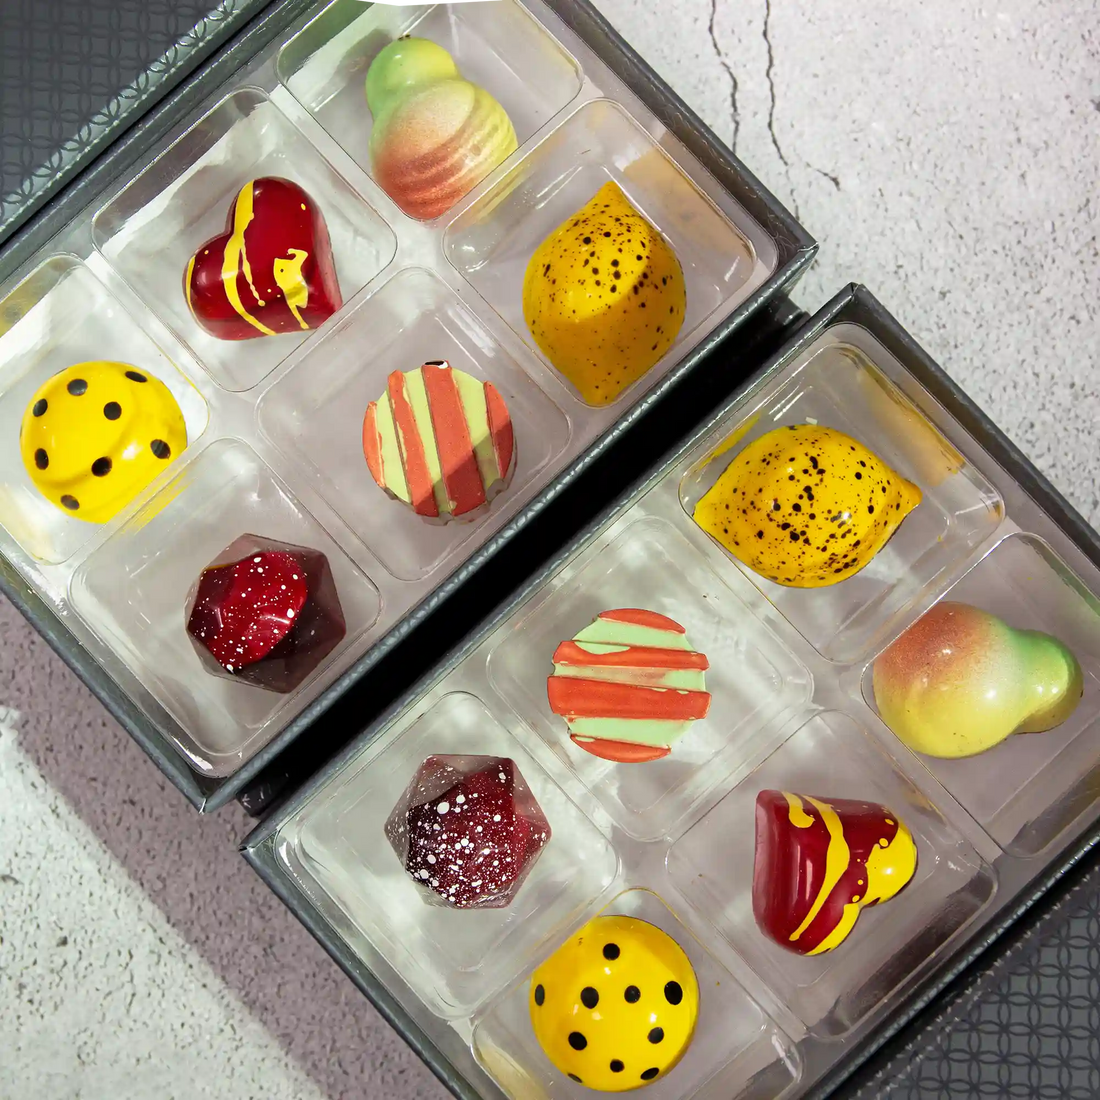 Vida Luxury chocolate gift box with 6 pieces of brightly painted fruity flavored chocolates